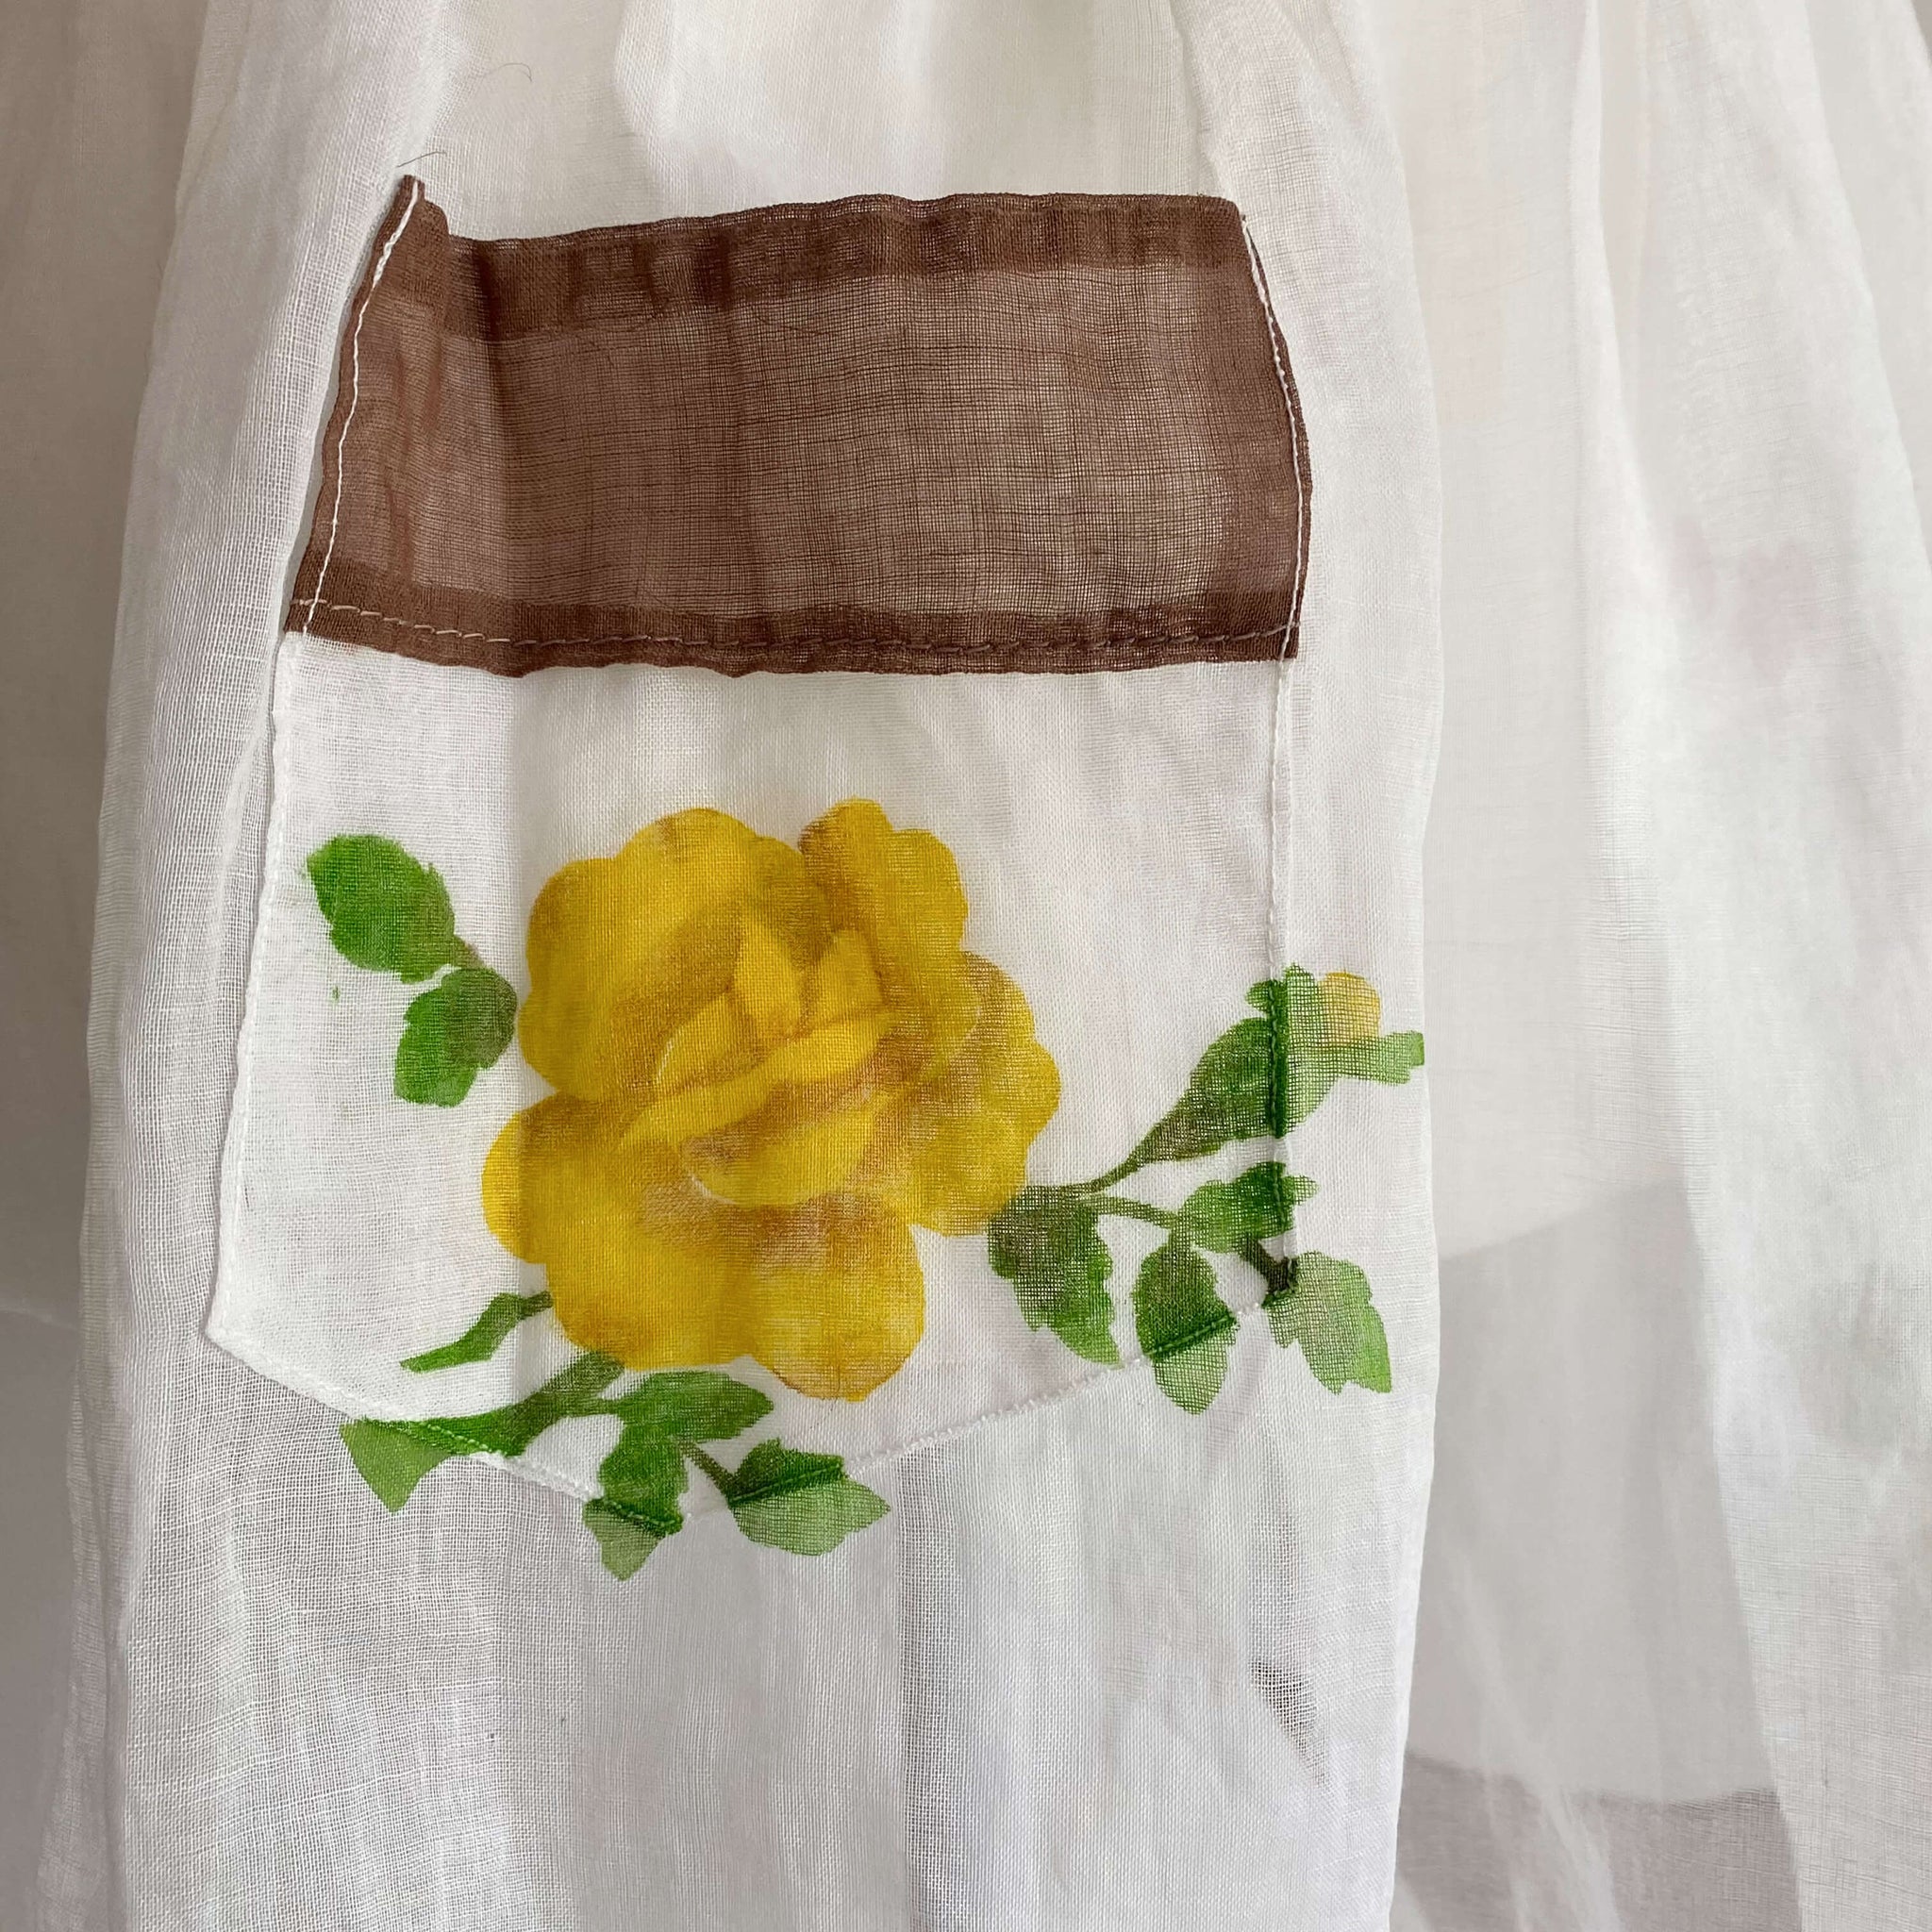 Vintage Organdy Half-Apron with Yellow Roses and Purple Flowers circa 1950s